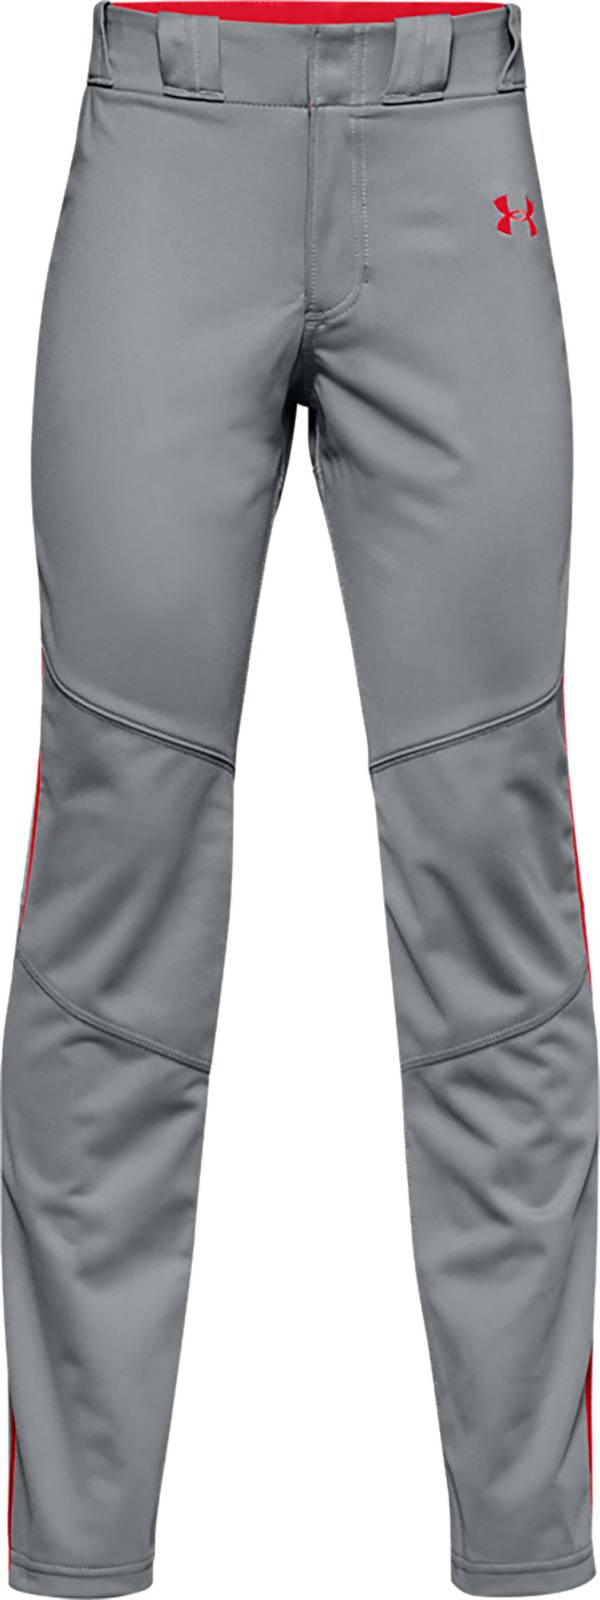 Under Armour Toddler Boys Gray Red Athletic Pants NEW